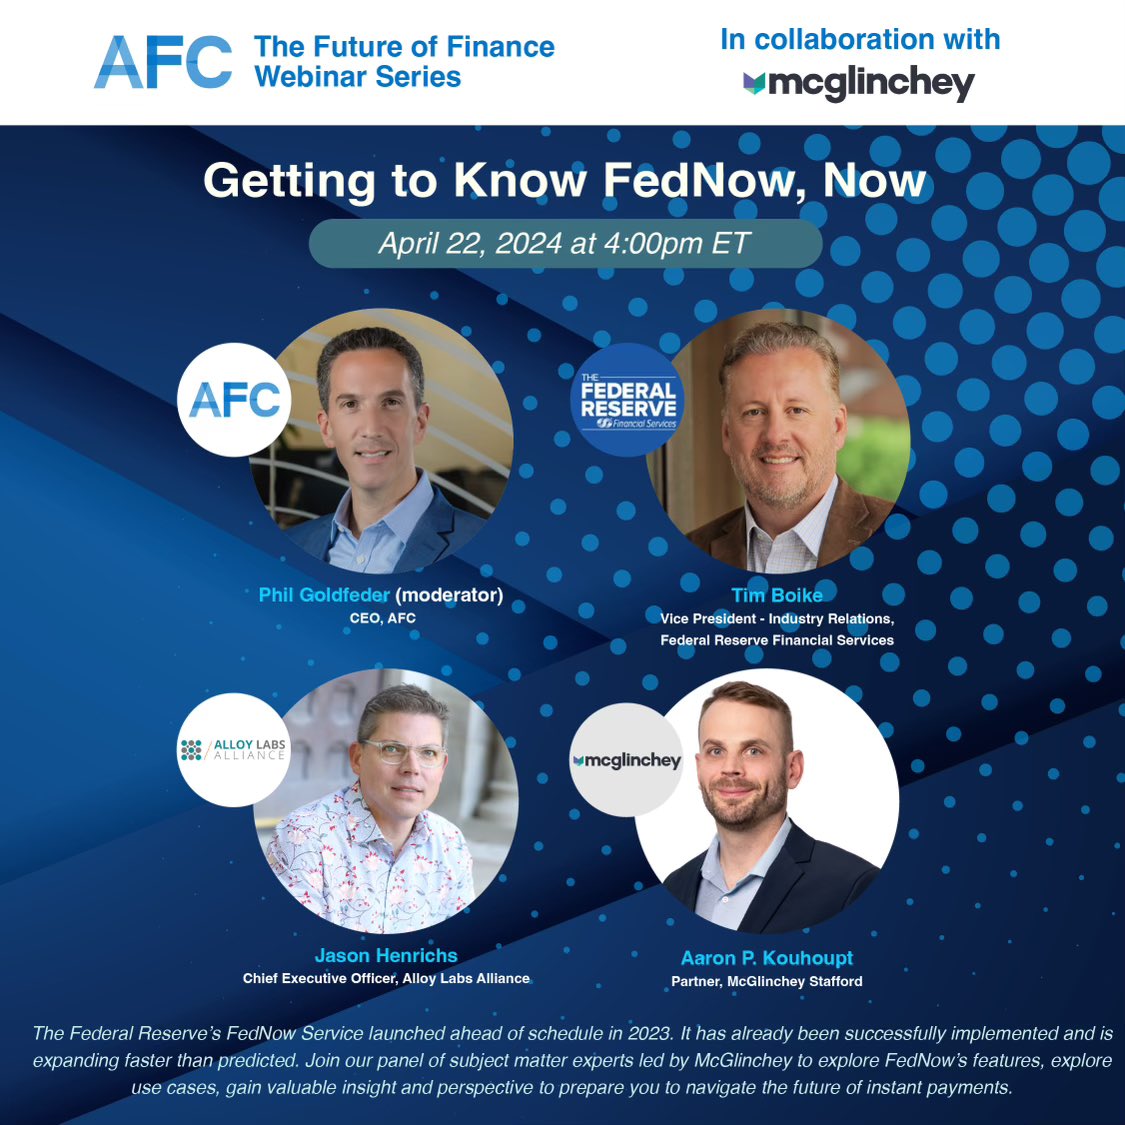 There's a reason for the hype surrounding #FedNow and if you want to know more, you do not want to miss this upcoming webinar that we are hosting in collaboration with our partners at @McGlinchey on April 22nd 4pm ET! fintechcouncil-org.zoom.us/webinar/regist…